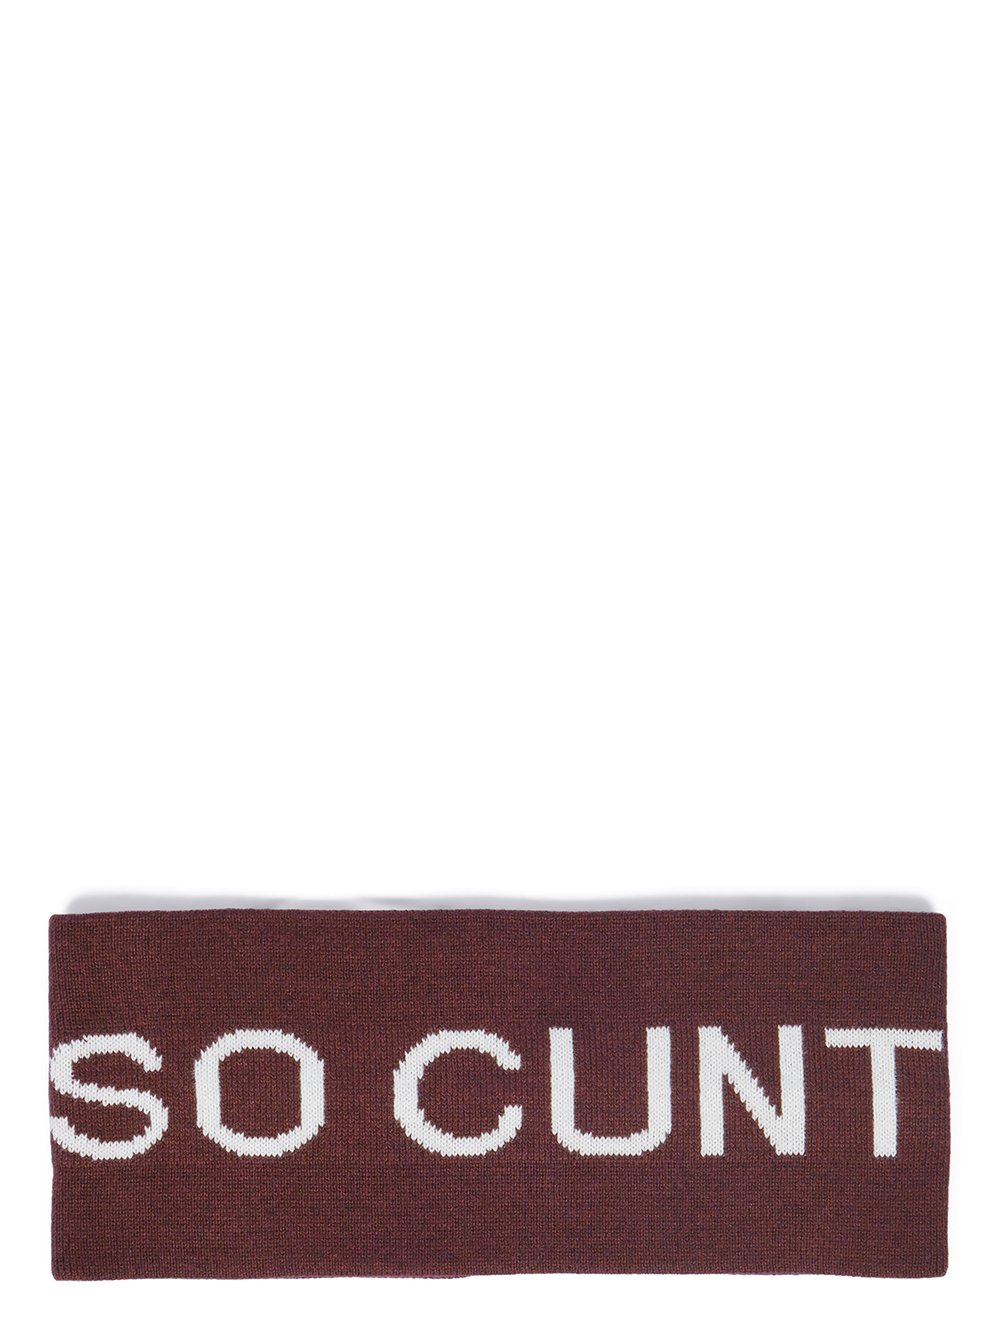 RICK OWENS FW23 LUXOR SO CUNT HEADBAND  IN MAUVE AND MILK COTTON KNIT